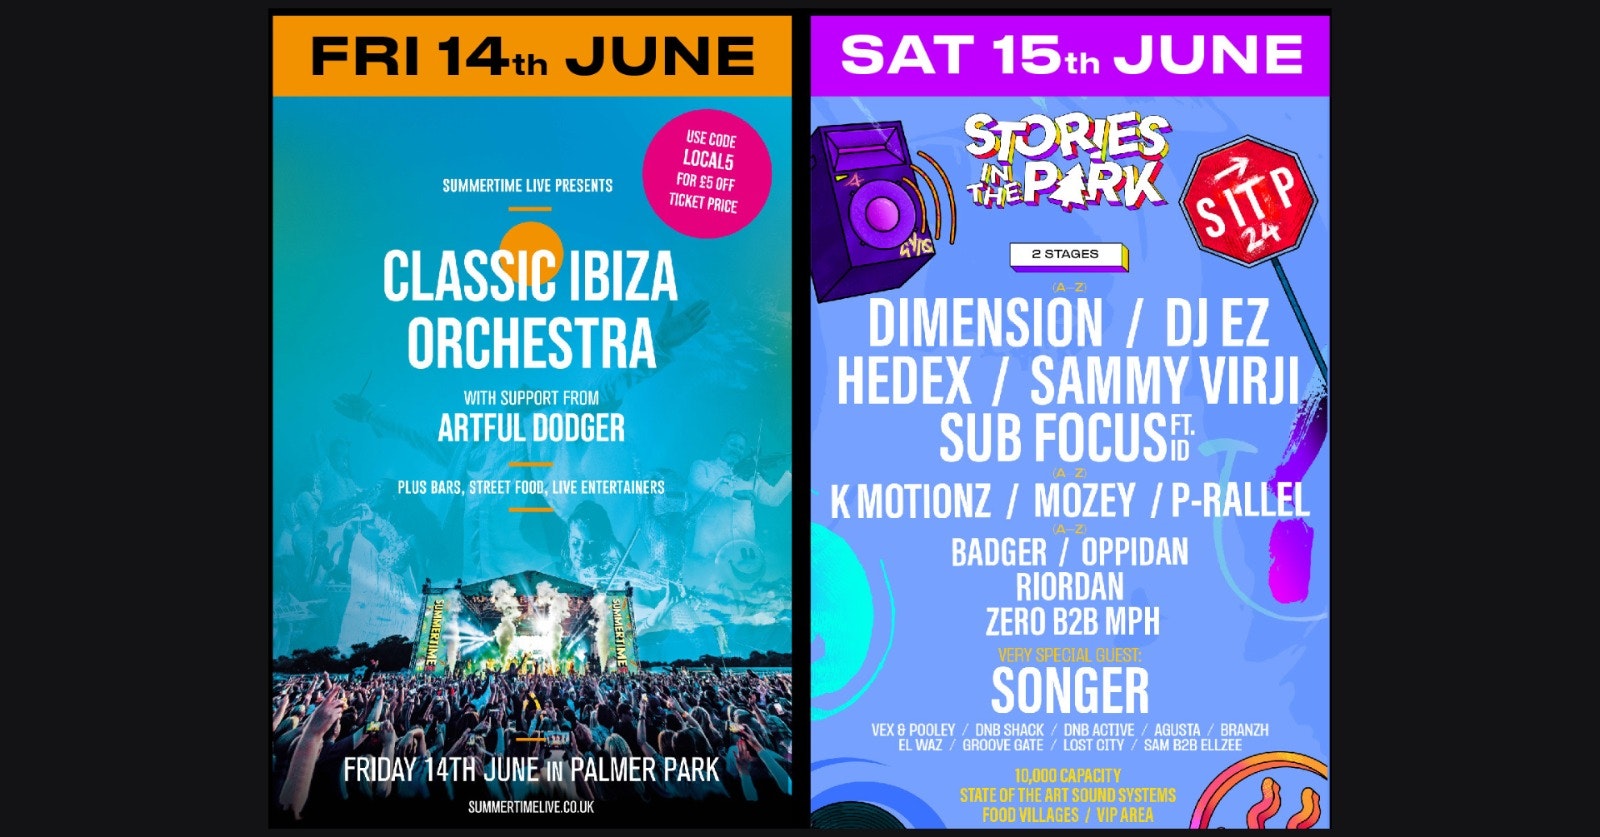 Friday 14th Ibiza Classic Orchestra // Saturday 15th Stories In The Park